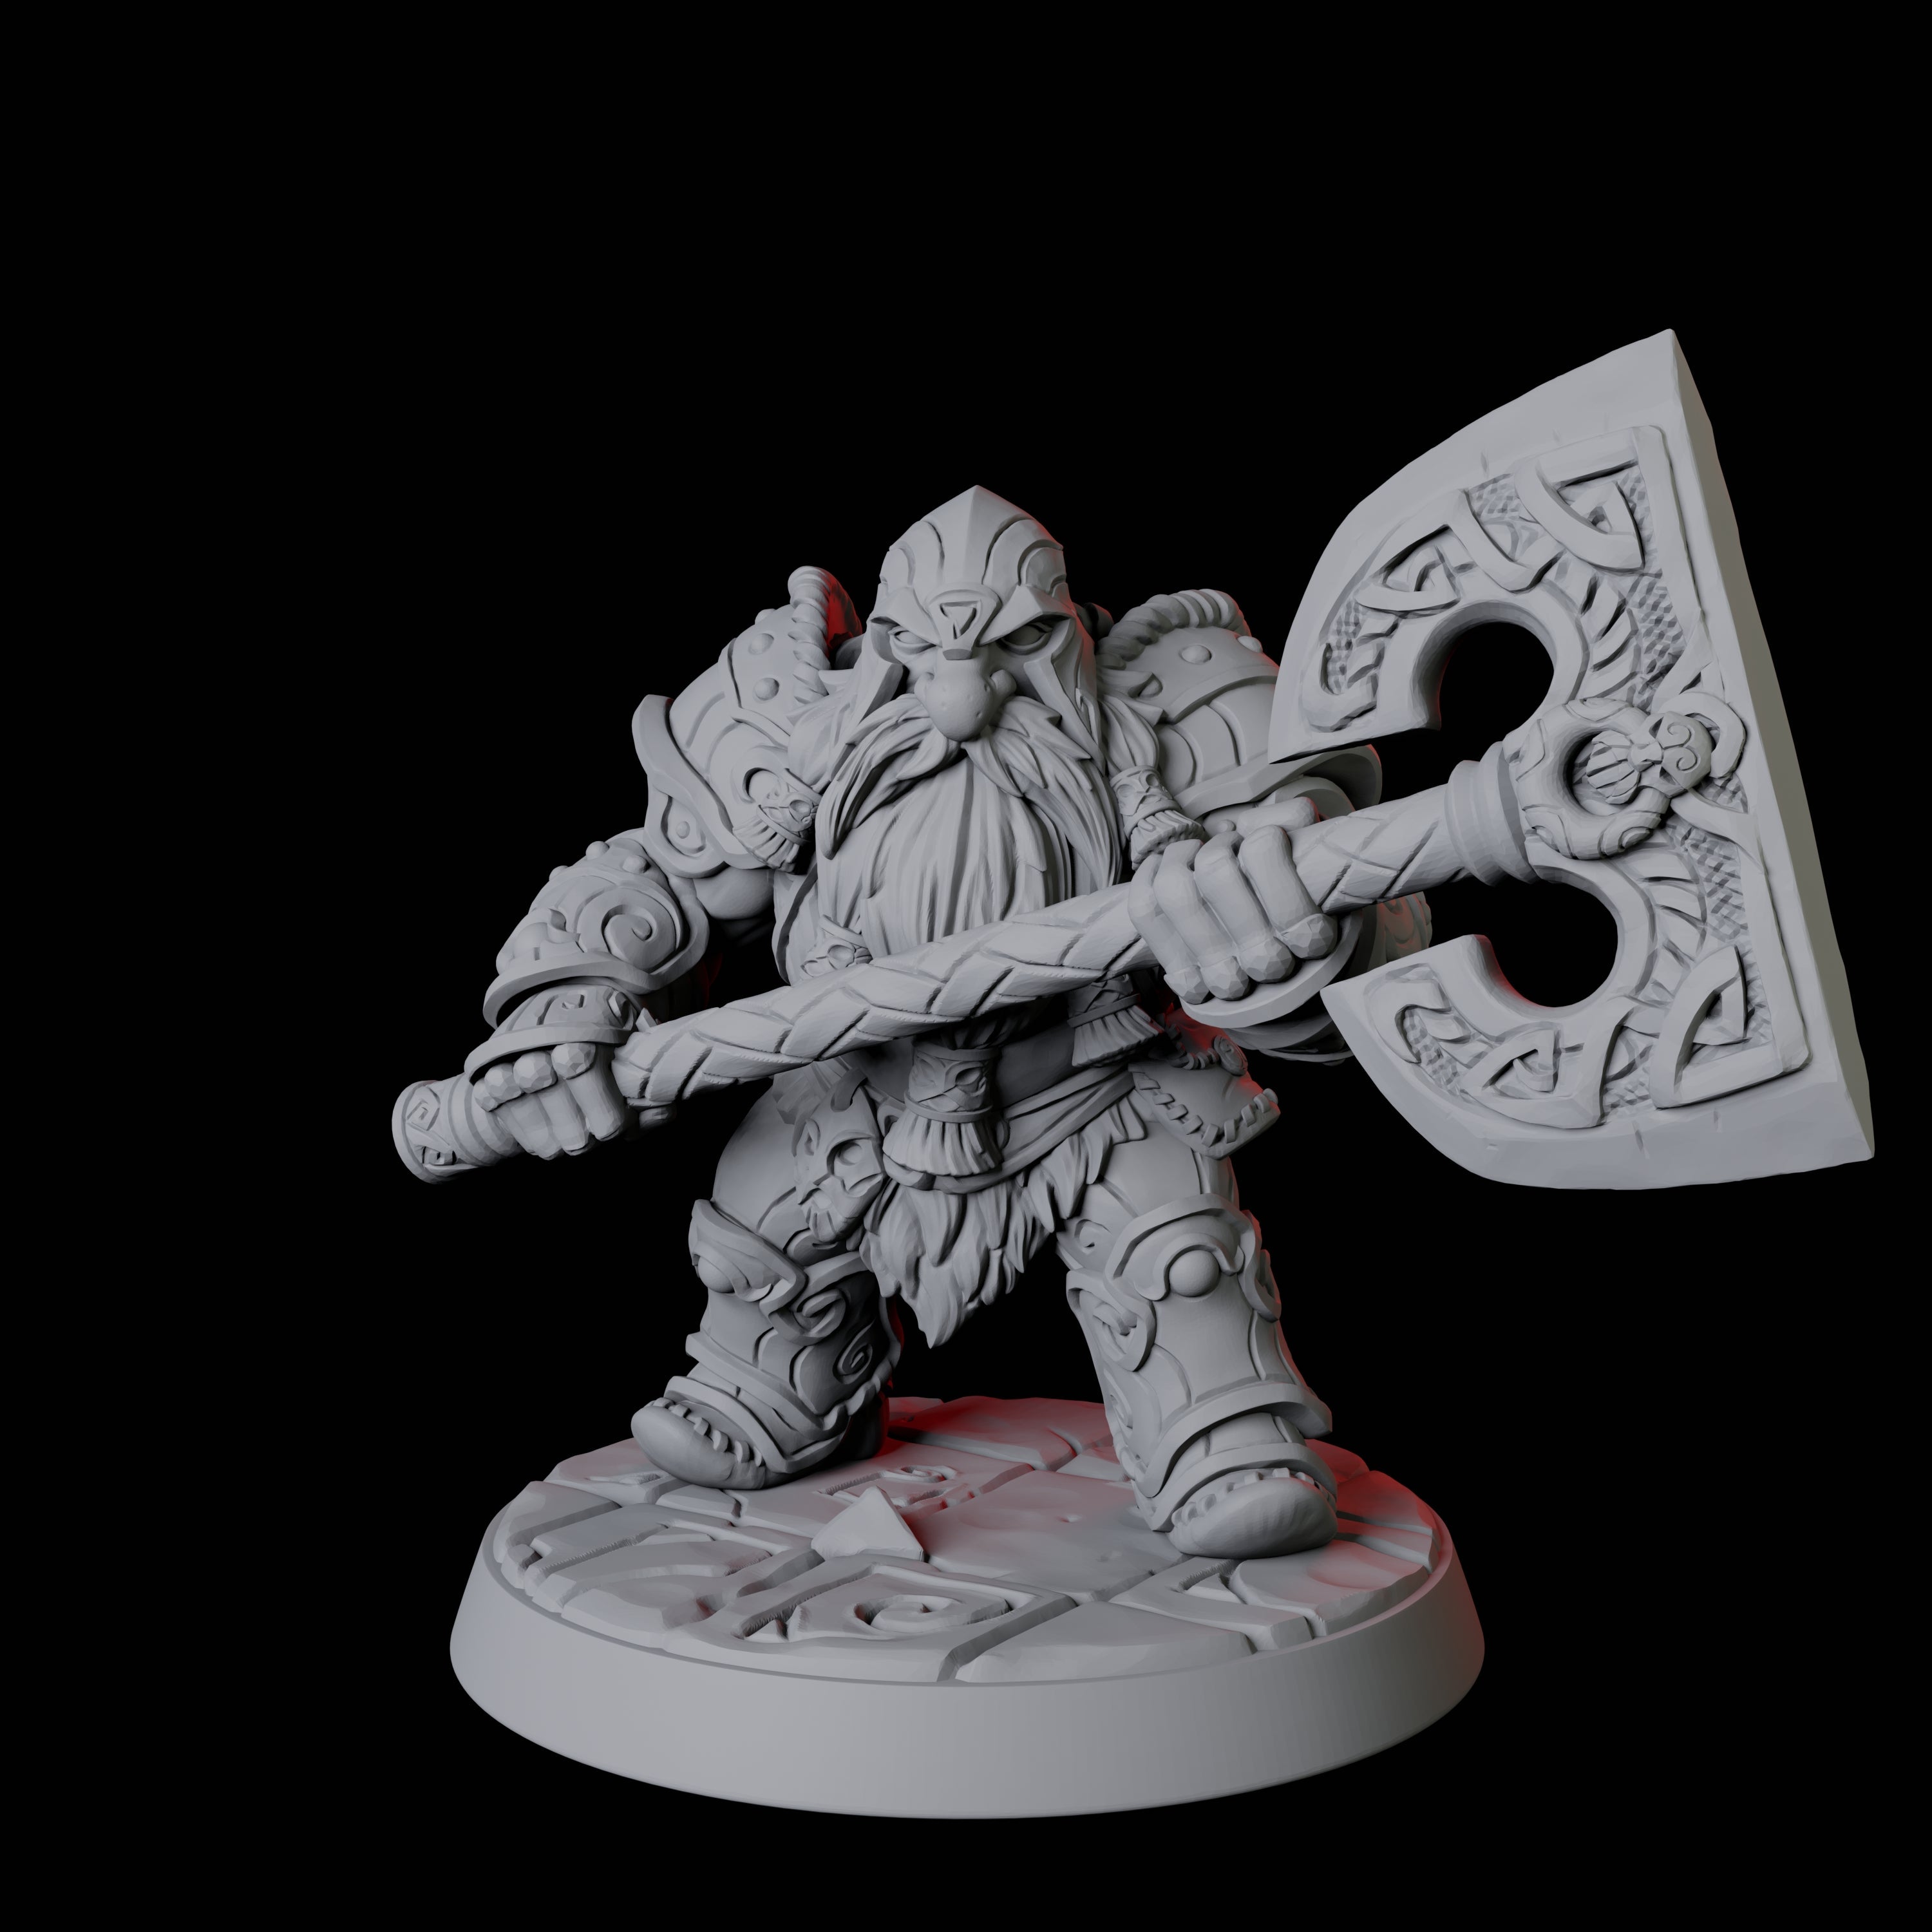 City Guard Dwarf B Miniature for Dungeons and Dragons, Pathfinder or other TTRPGs